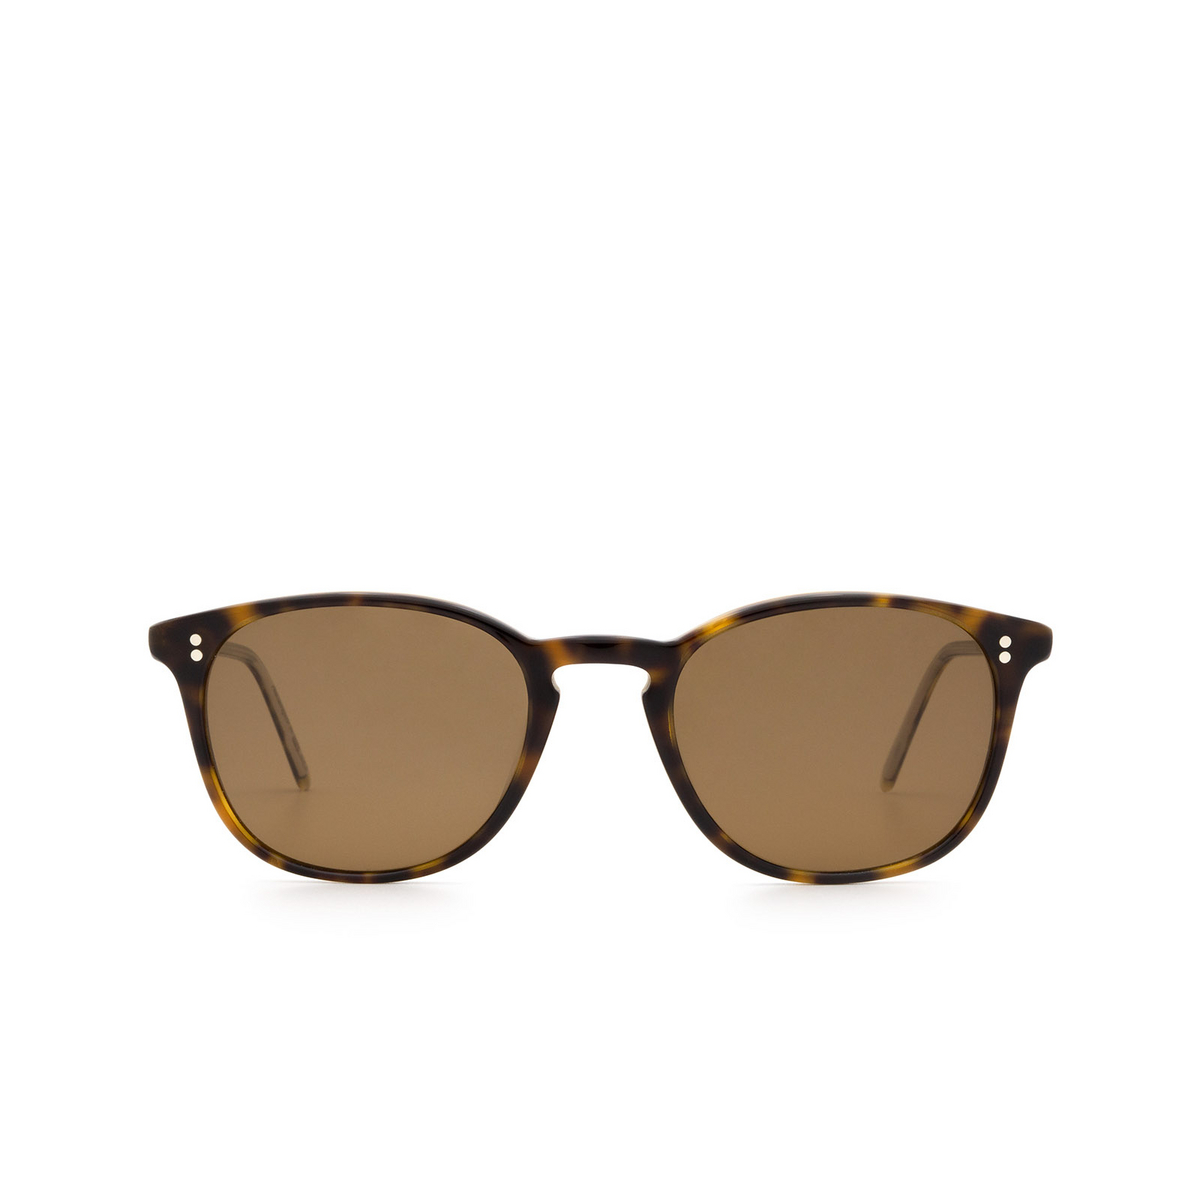 Occhiali da sole Oliver Peoples FINLEY VINTAGE 166657 362 / Horn - frontale